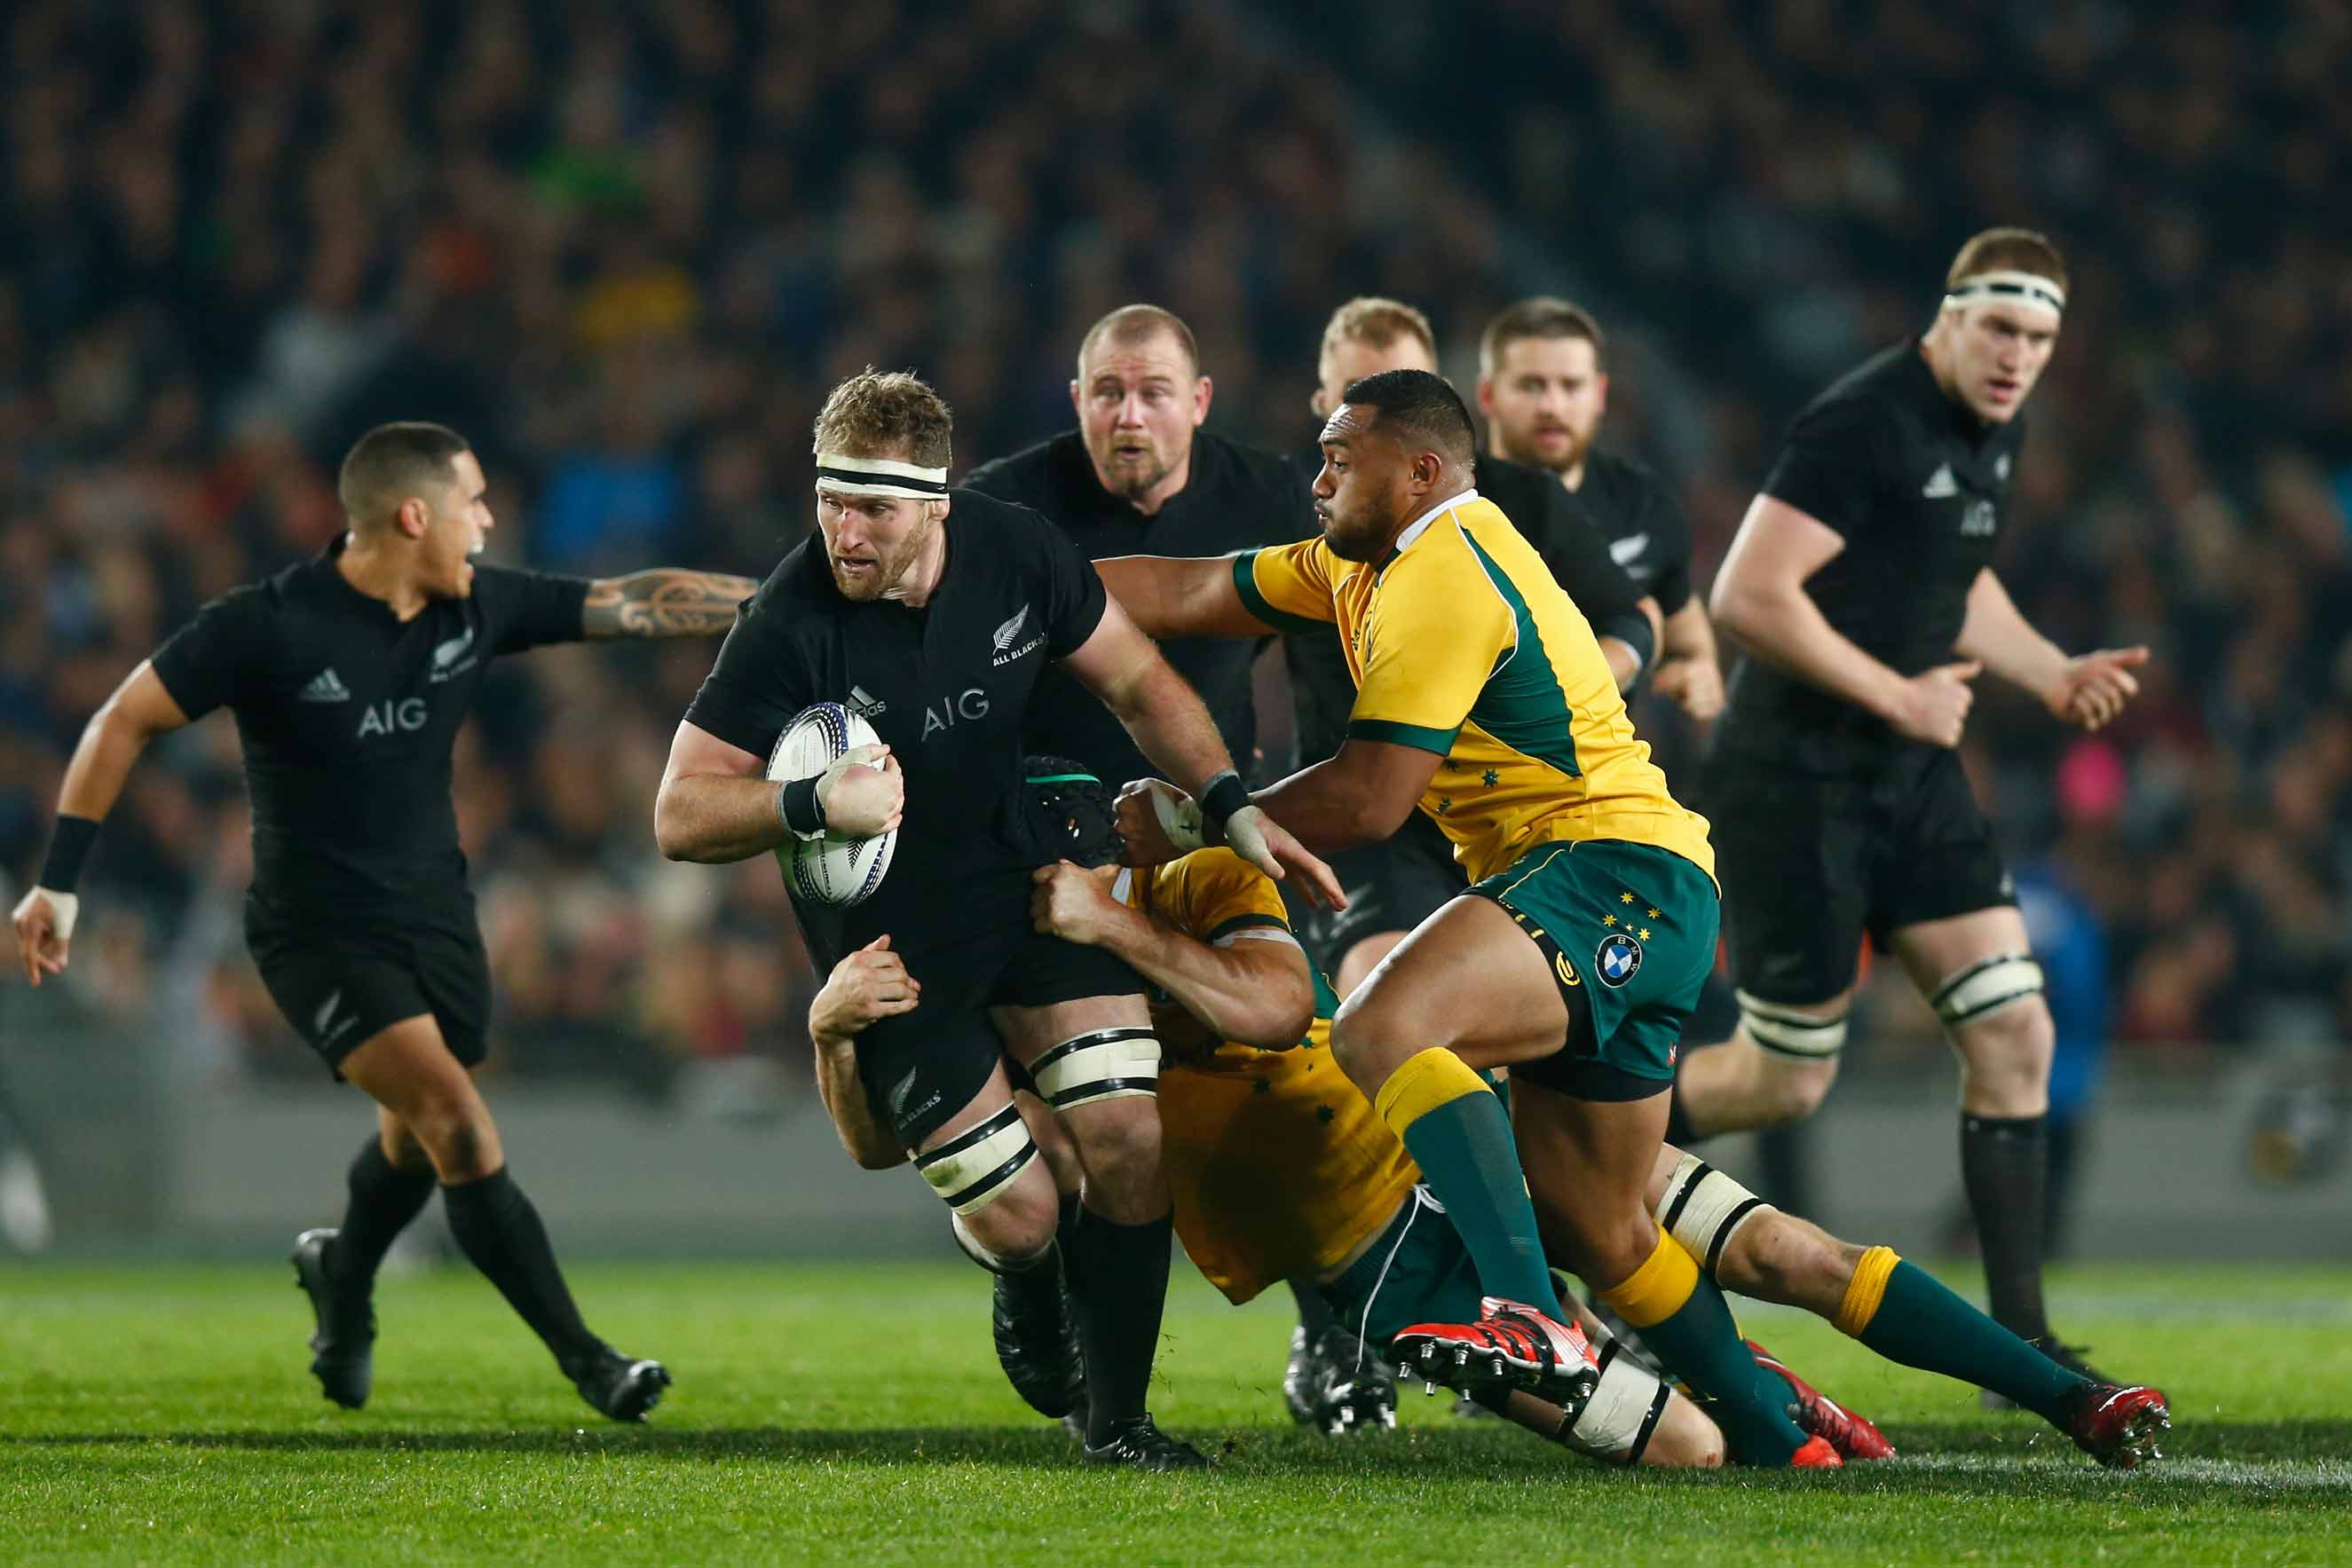 Kieran Read of the All Blacks is tackled  during The Rugby Championship, Bledisloe Cup match between the New Zealand All Blacks and the Australian Wallabies at Eden Park on Aug. 15, 2015 in Auckland. (Phil Walter—Getty Images)